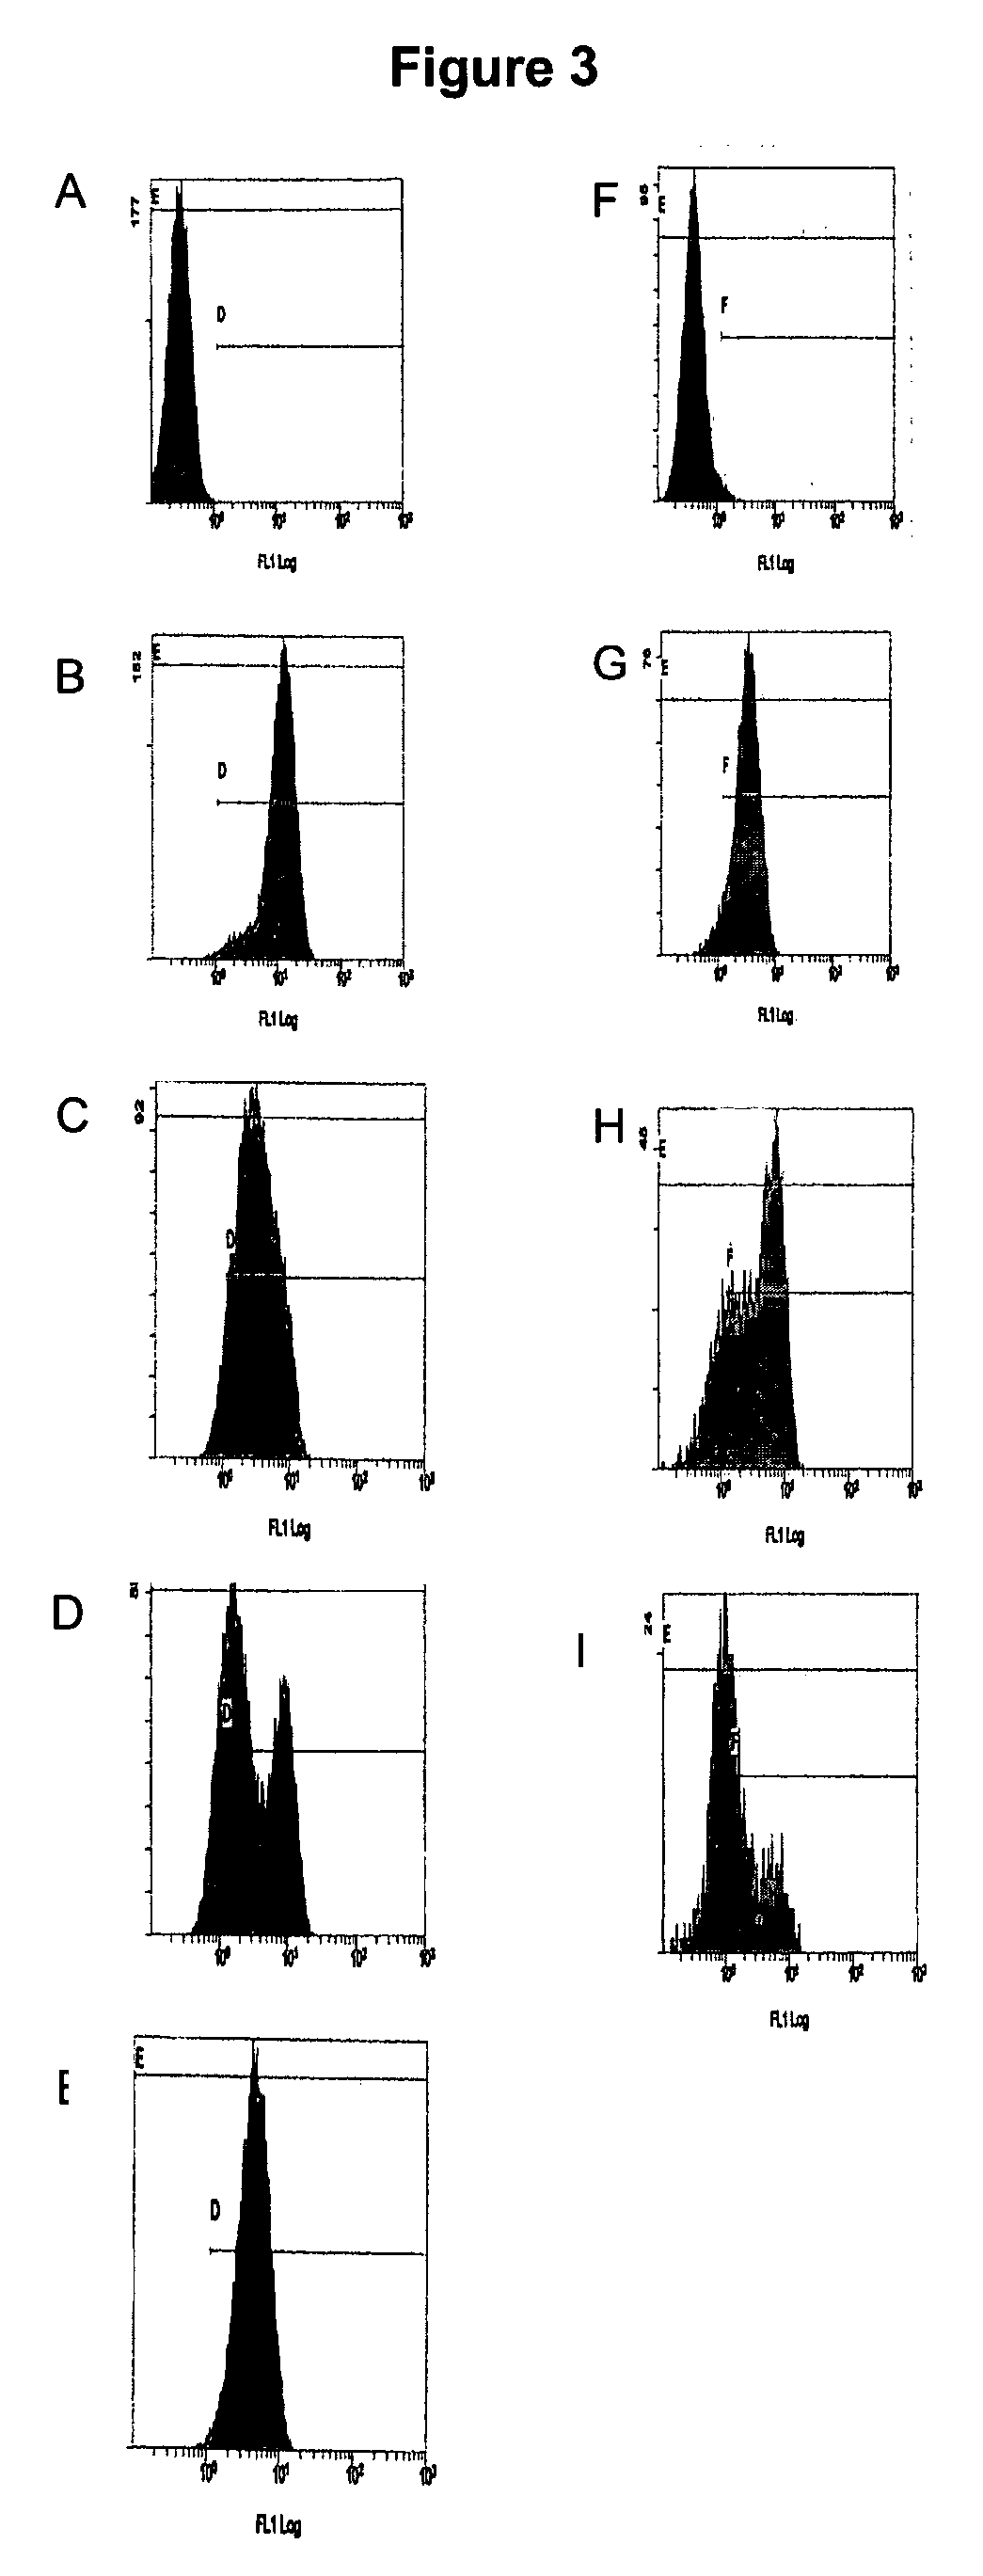 Methods for increasing definitive endoderm differentiation of pluripotent human embryonic stem cells with PI-3 kinase inhibitors